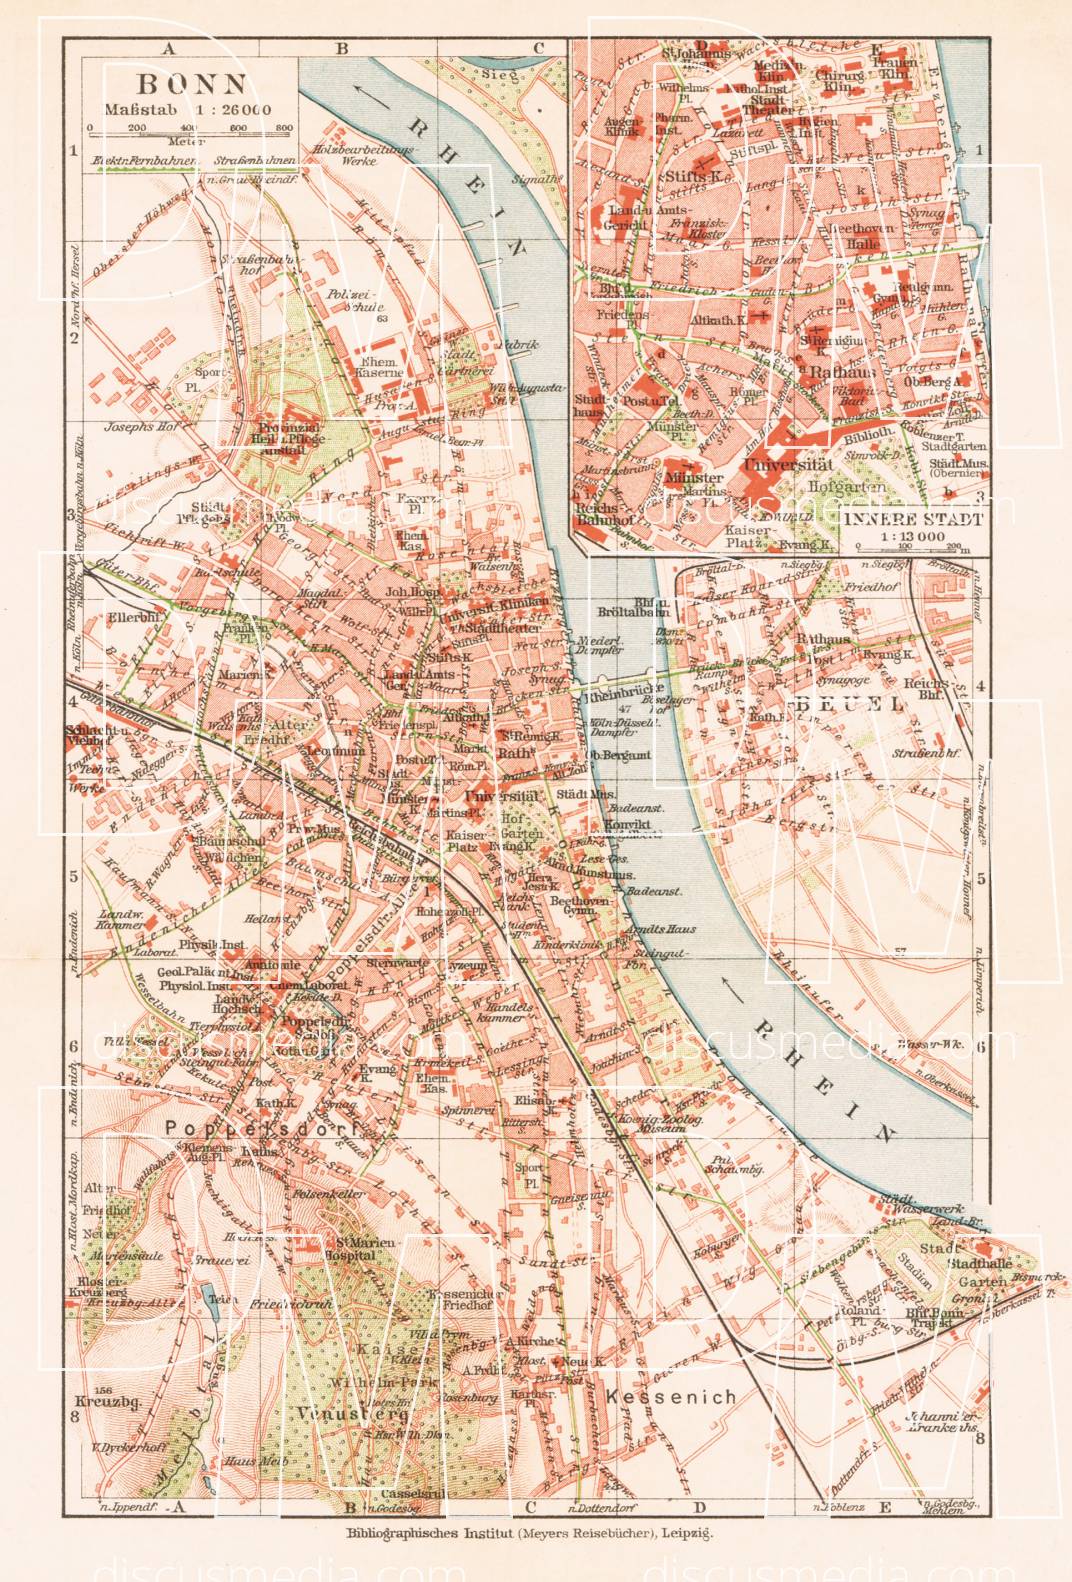 Old map of Bonn in 1927. Buy vintage map replica poster print or